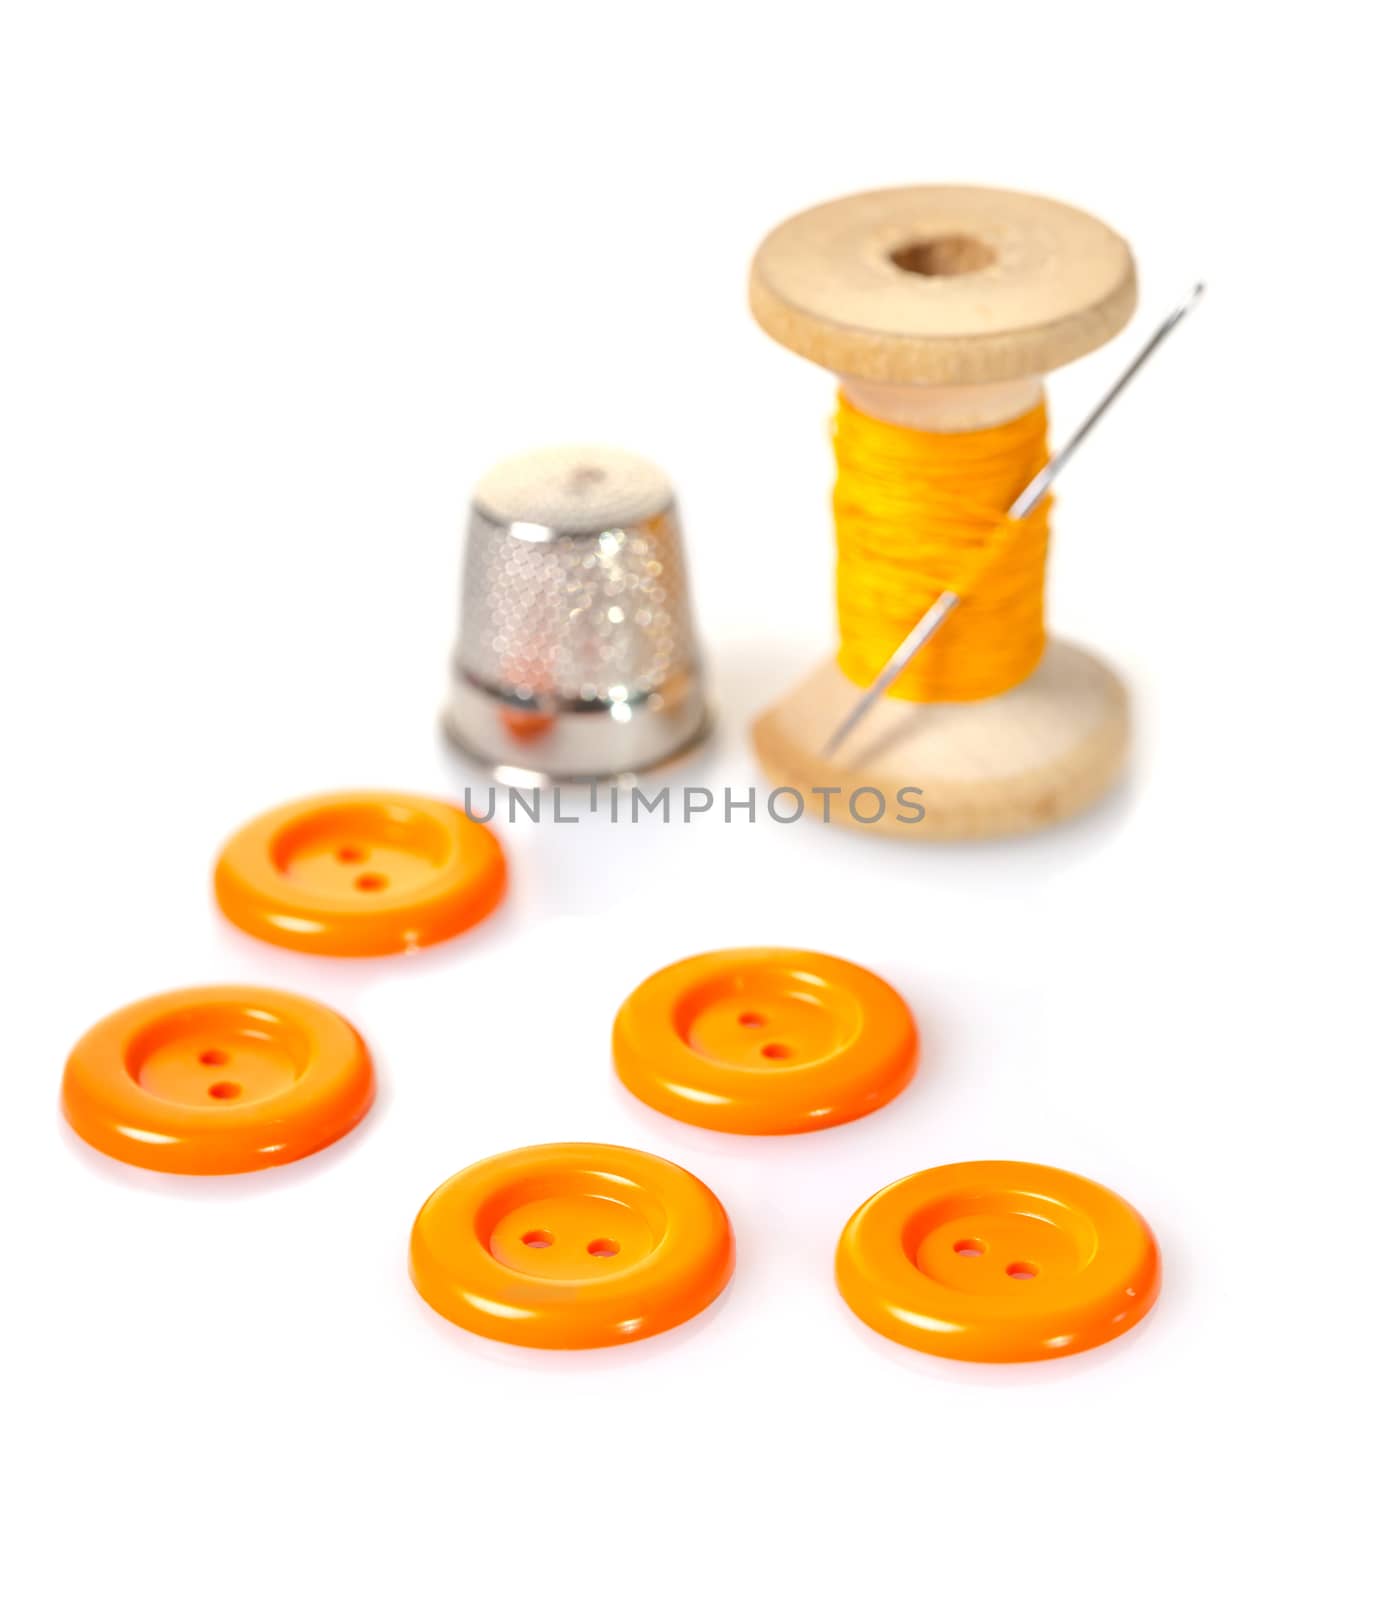 spool of thread and buttons  by MegaArt